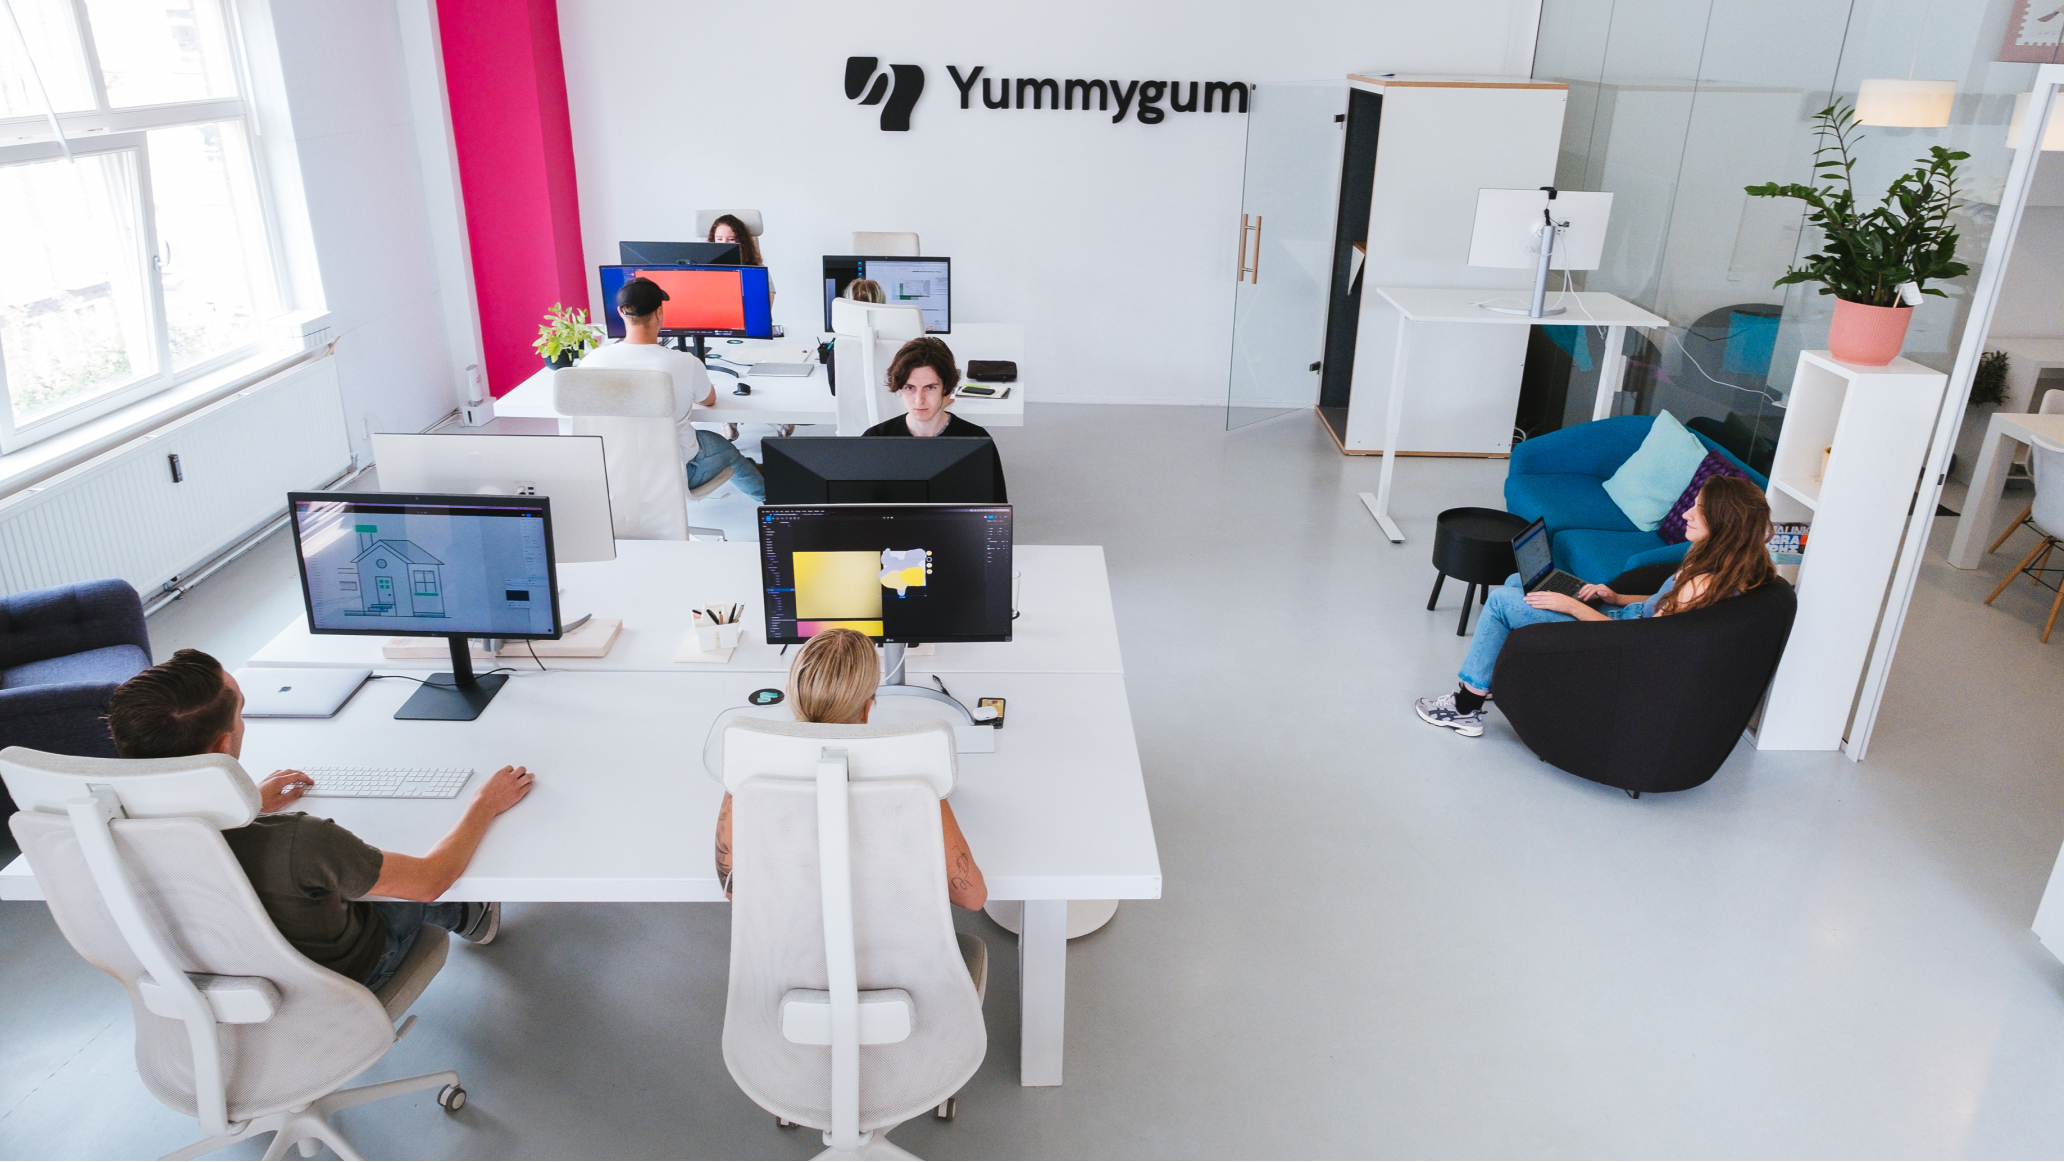 Wide angle top down view of the clean and minimalist Yummygum office that shows a black embossed logo that says Yummygum. The office shows two groups of two white desks with people working behind computers. Another person is actively working on their laptop as they sit in a dark anthracite chair.